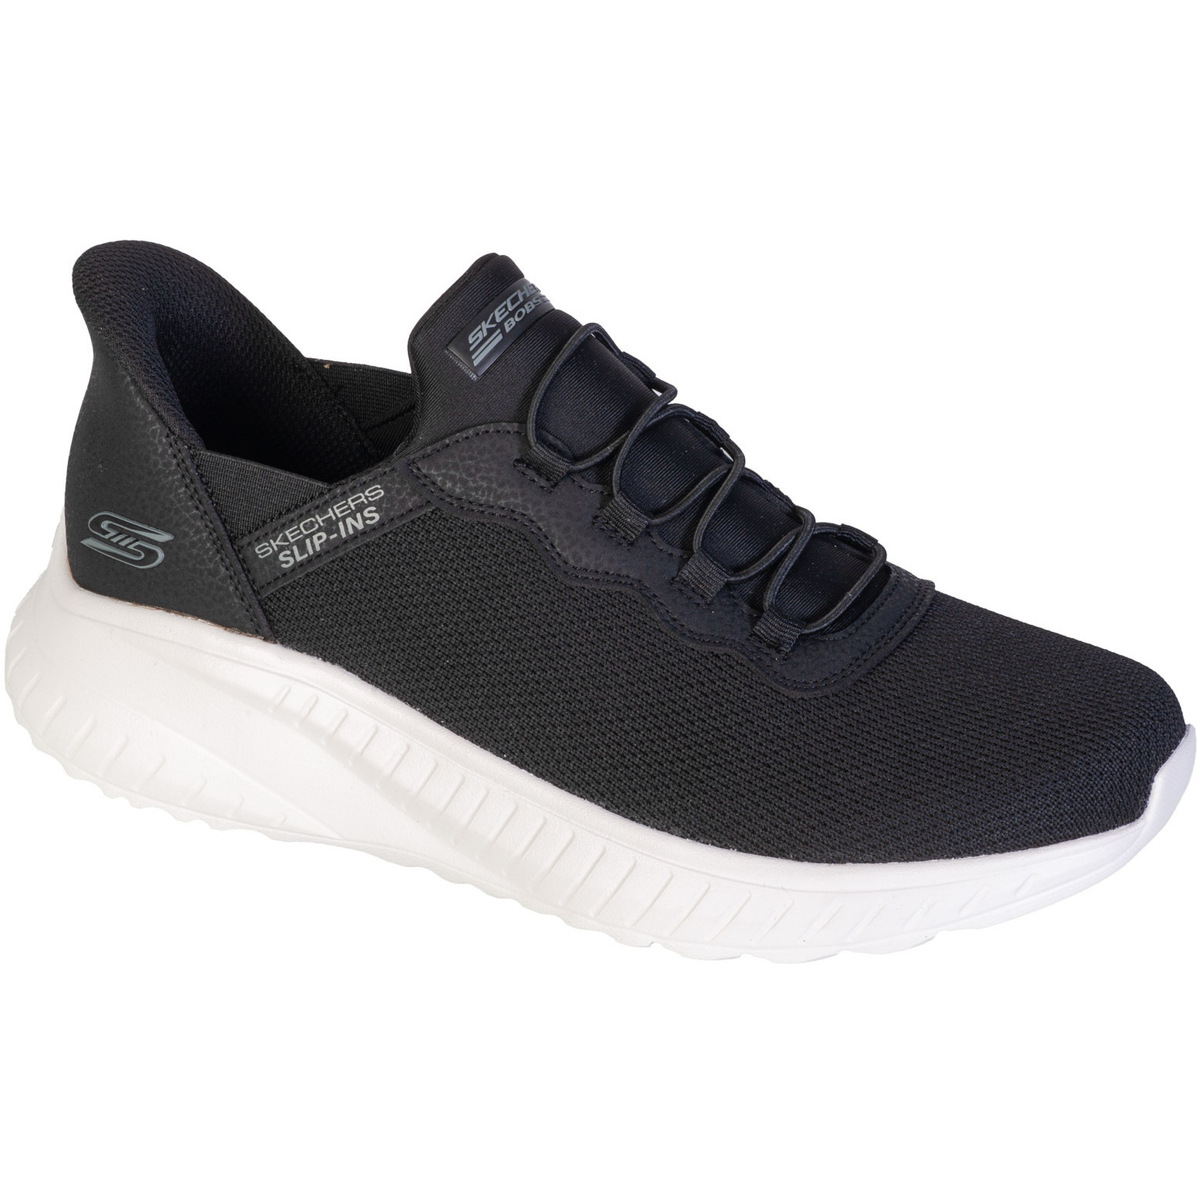 Xαμηλά Sneakers Skechers Slip-ins: BOBS Sport Squad Chaos